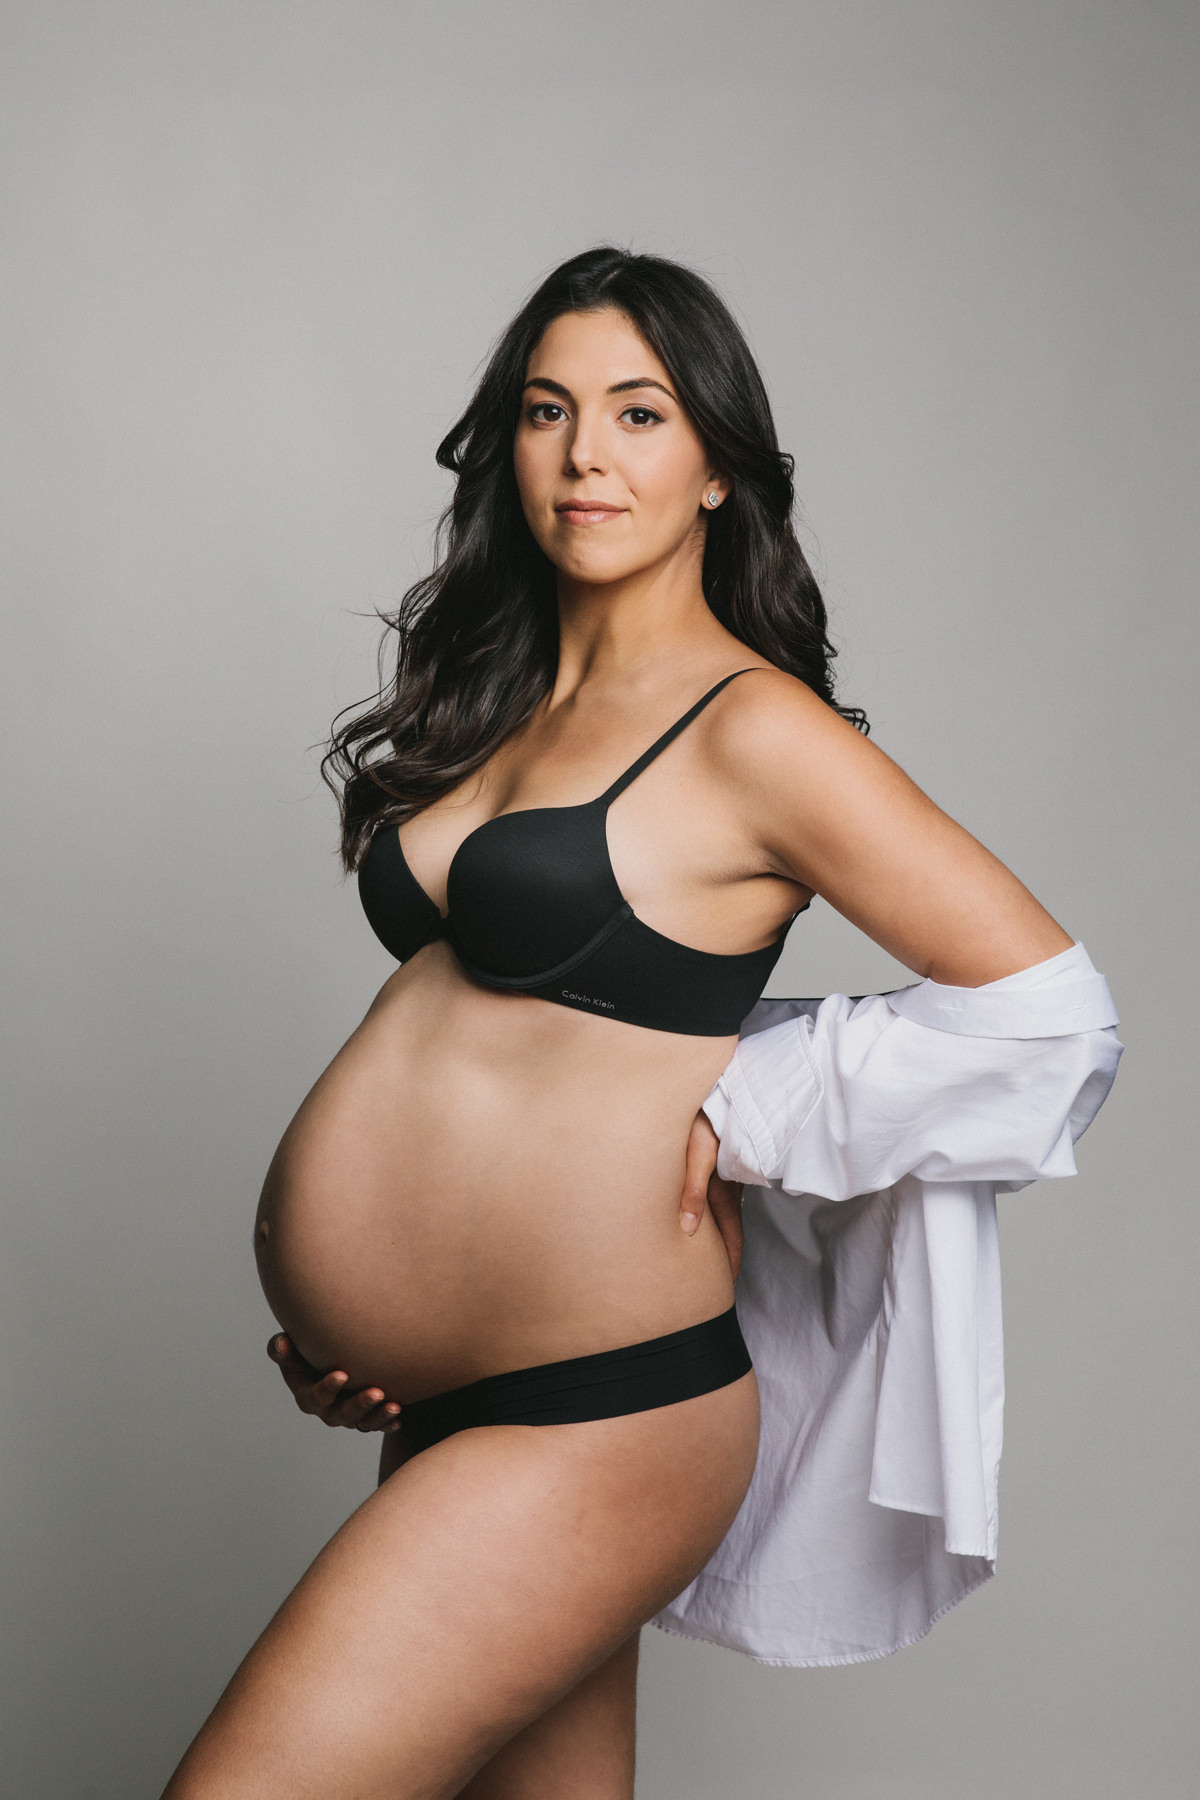 A maternity portrait of a beautiful expecting women. She is wearing a black underwear set and an oversized white dress shirt.